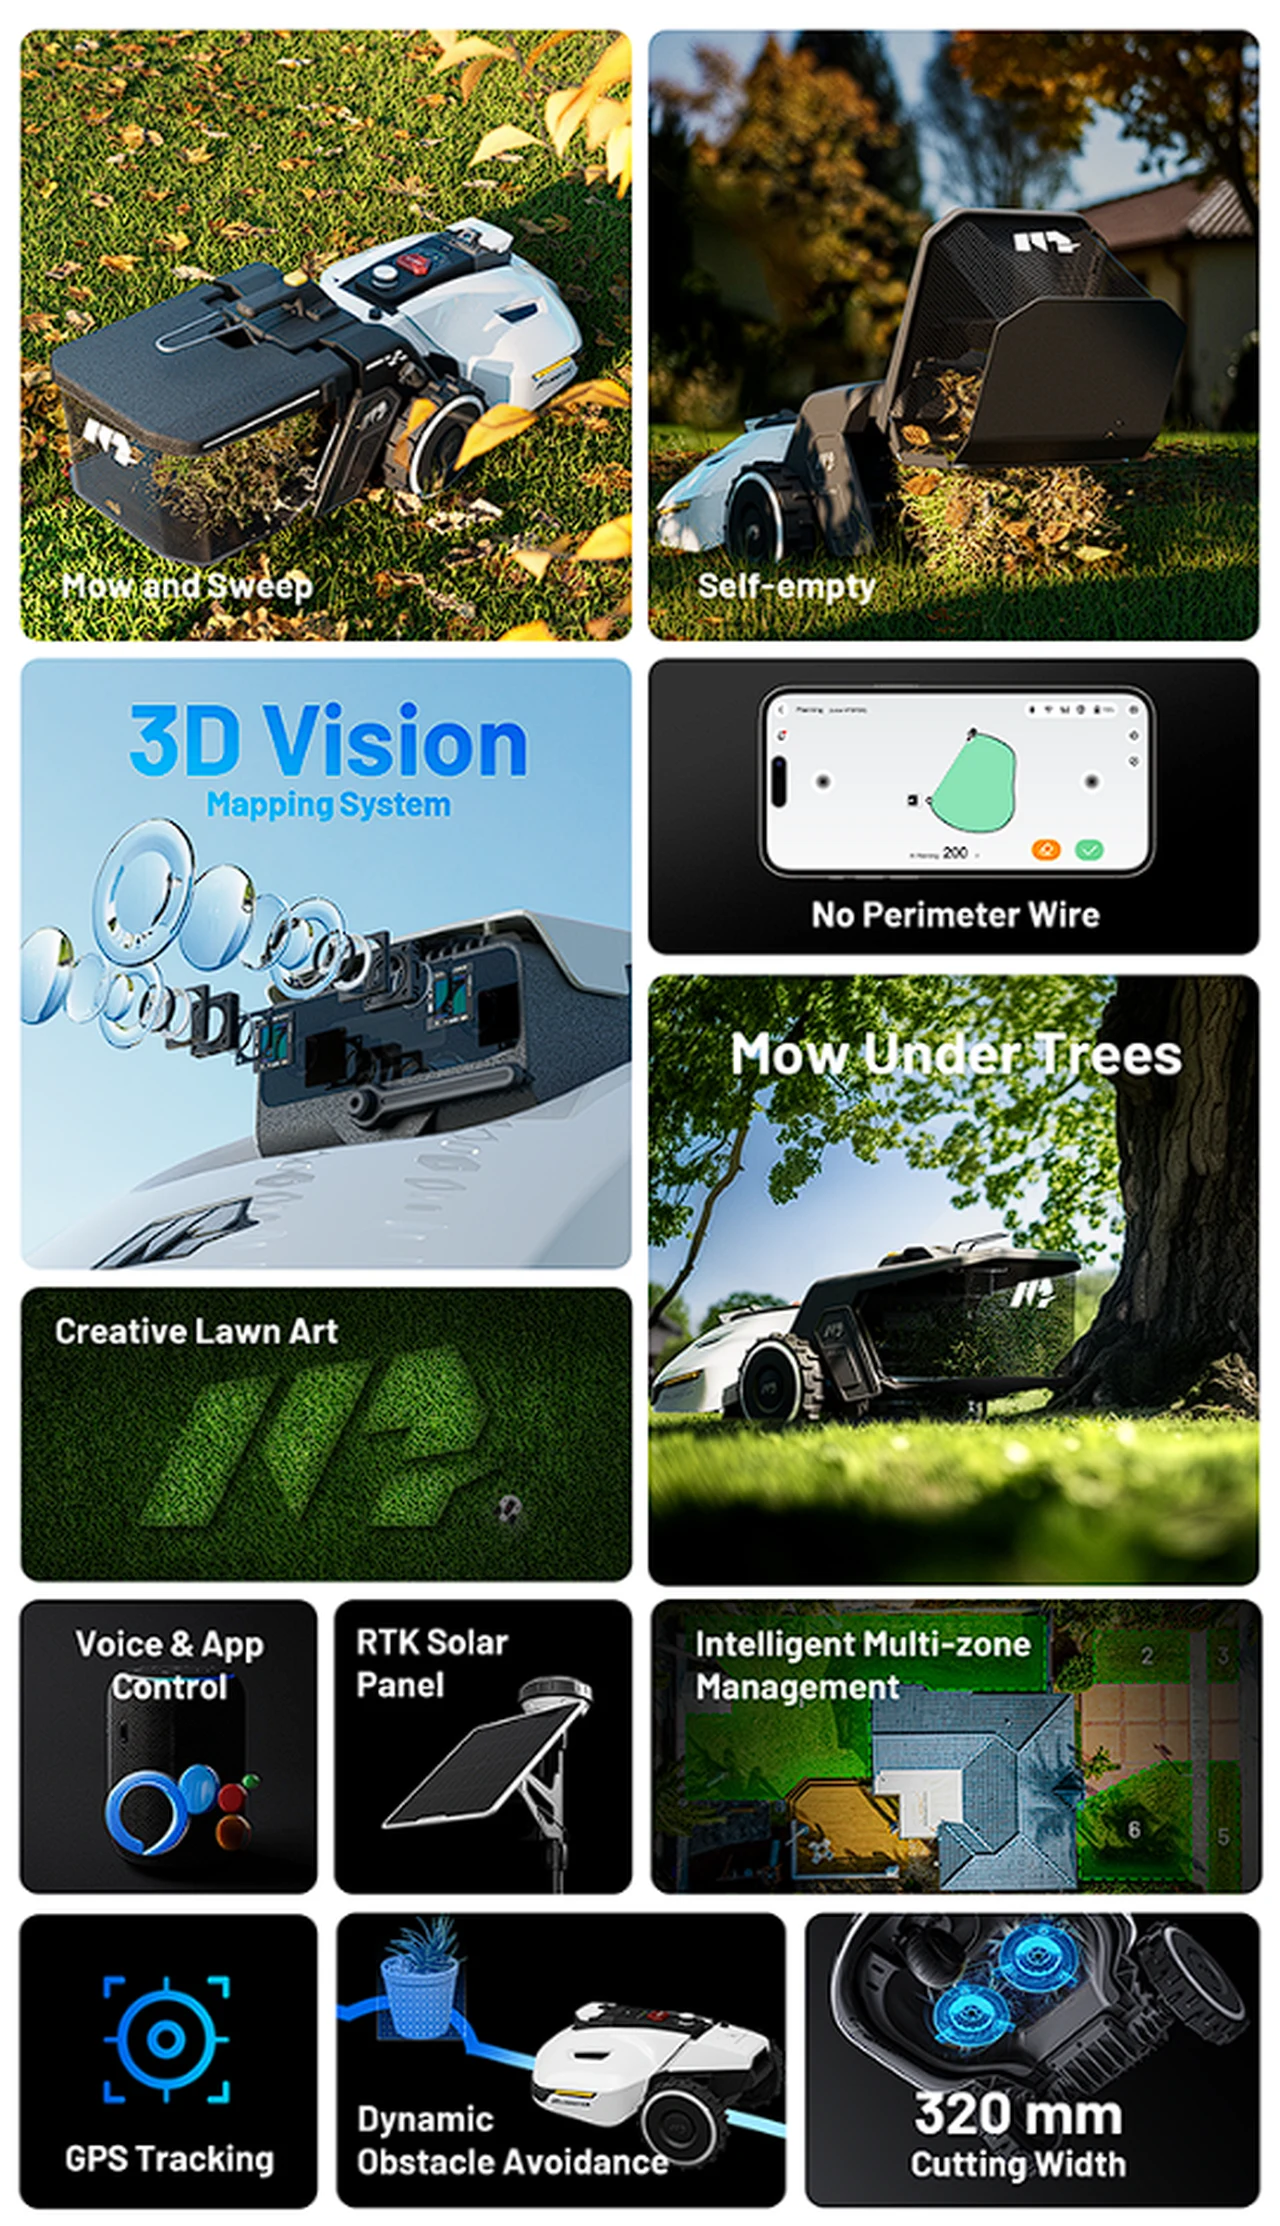 YUKA 3D Vision robot lawnmower features